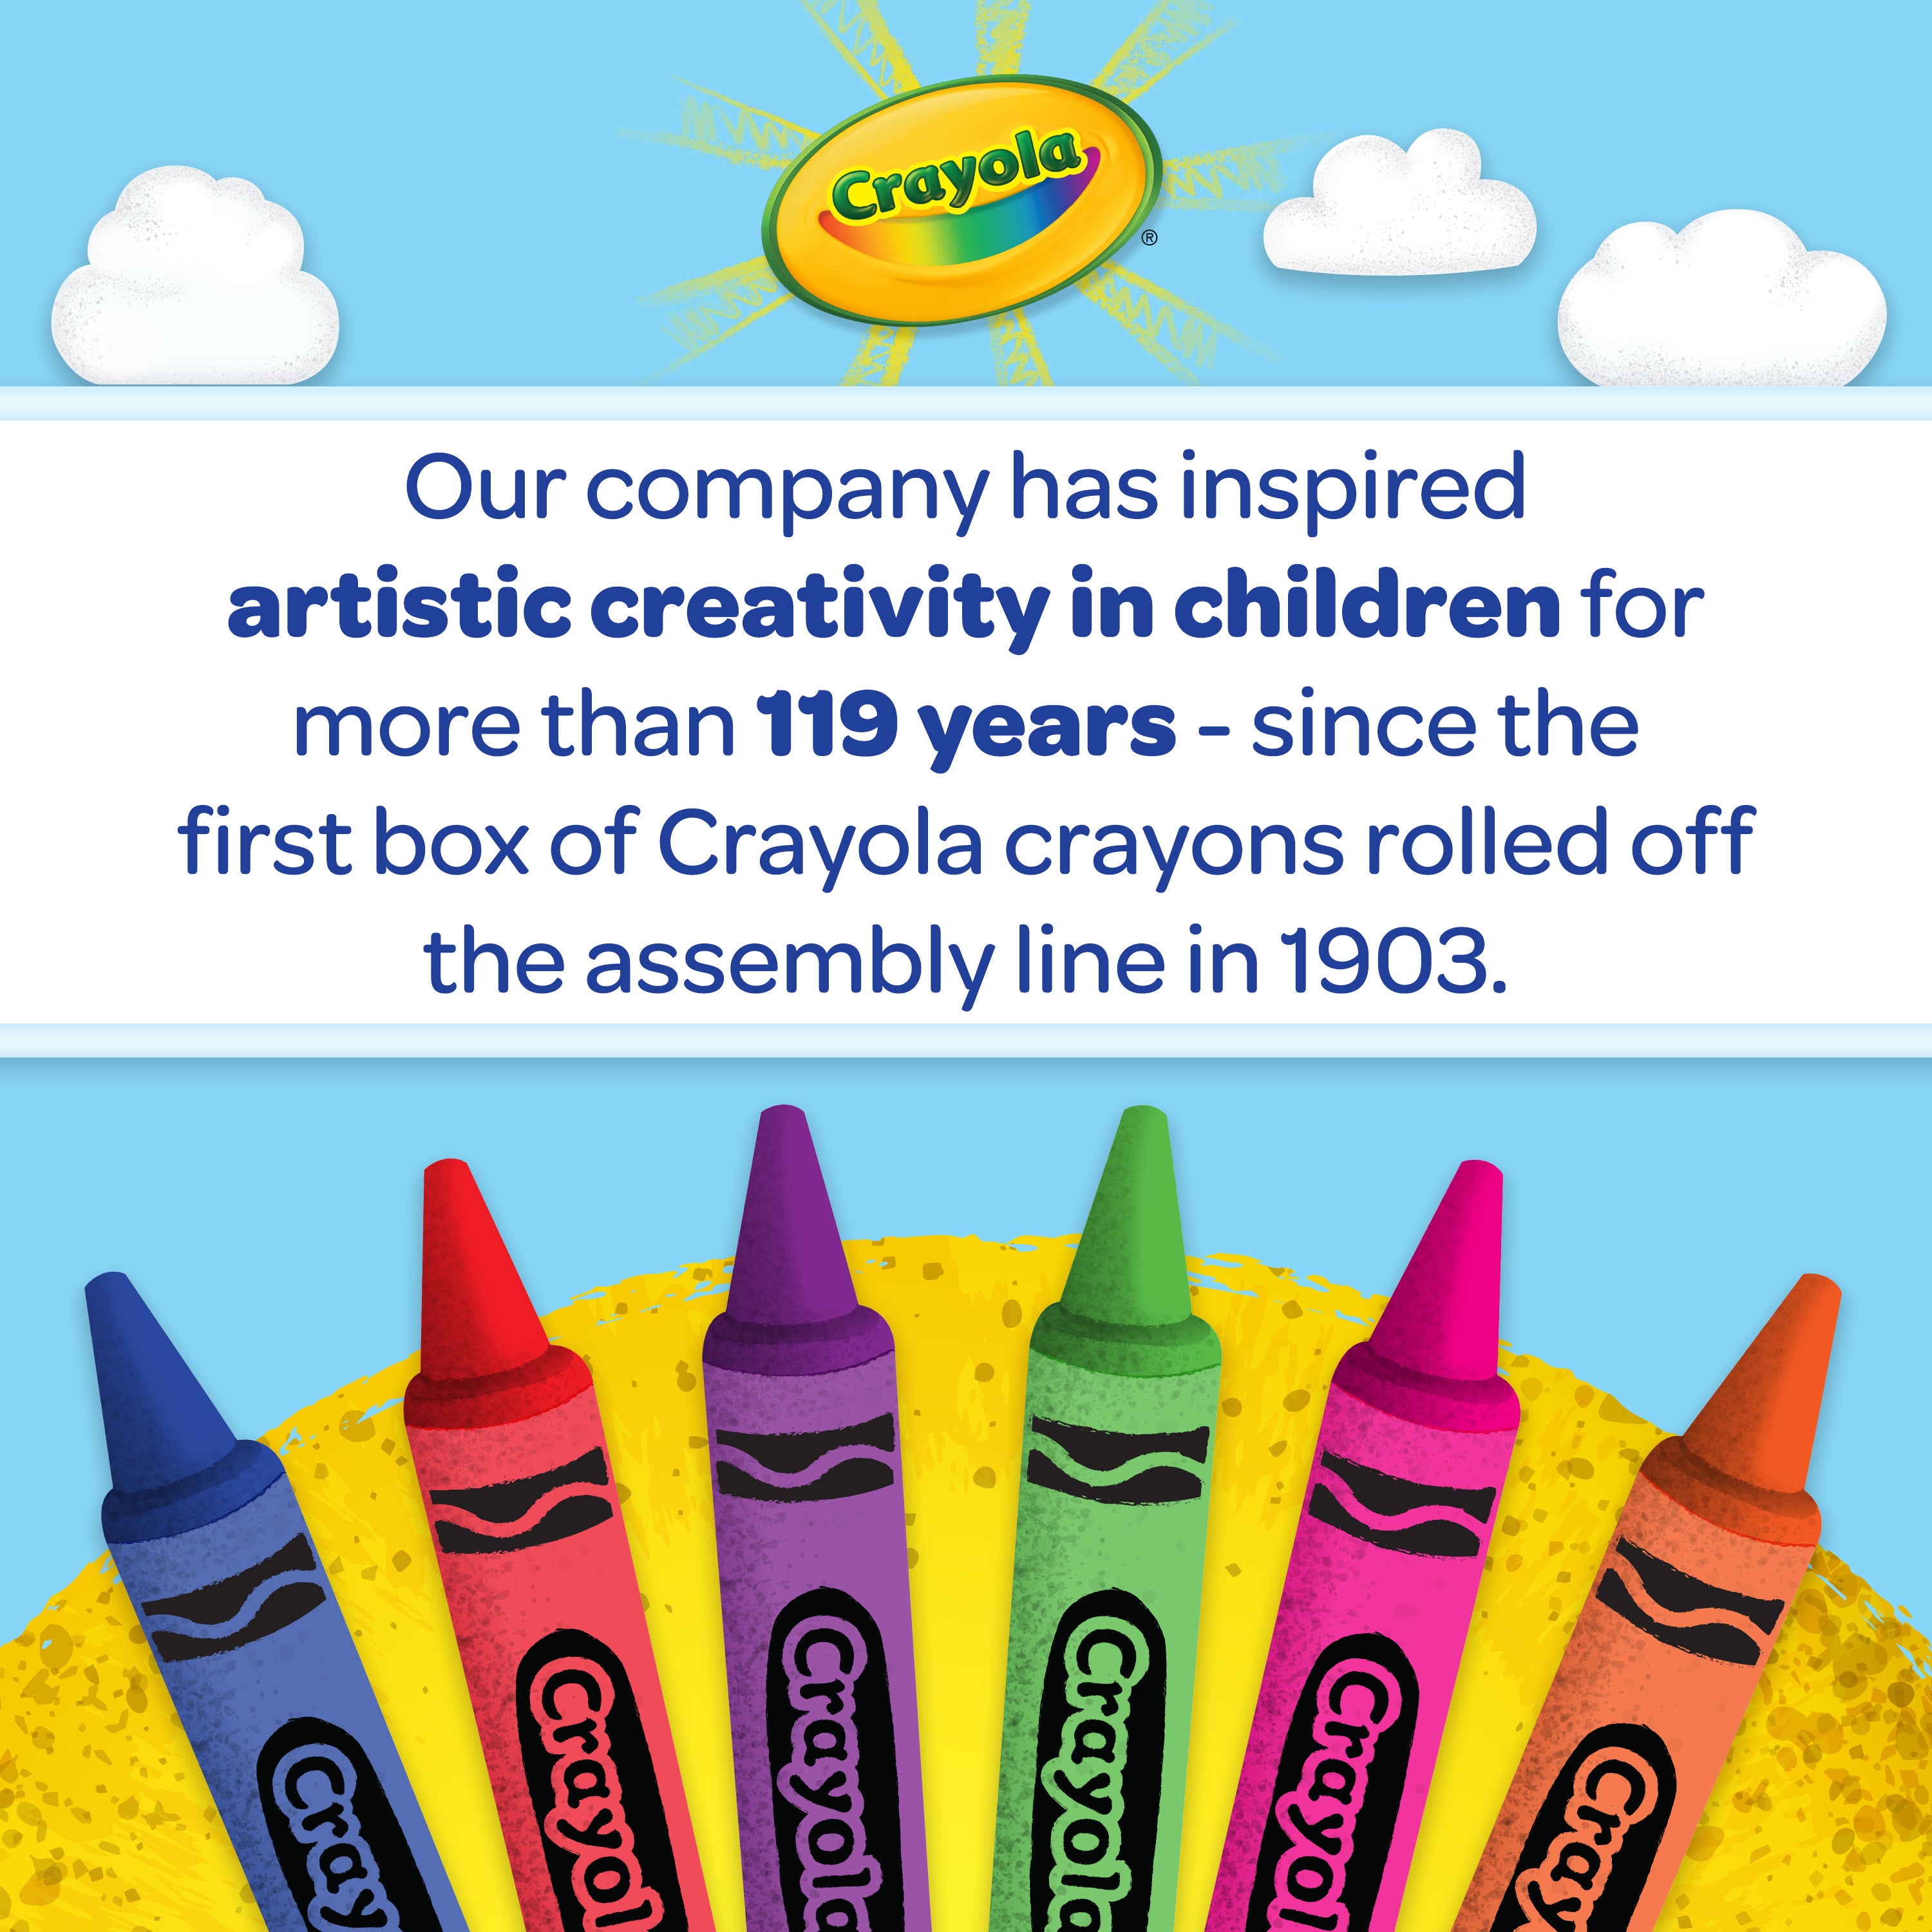 Crayola 96 Page Colouring Book, Bluey